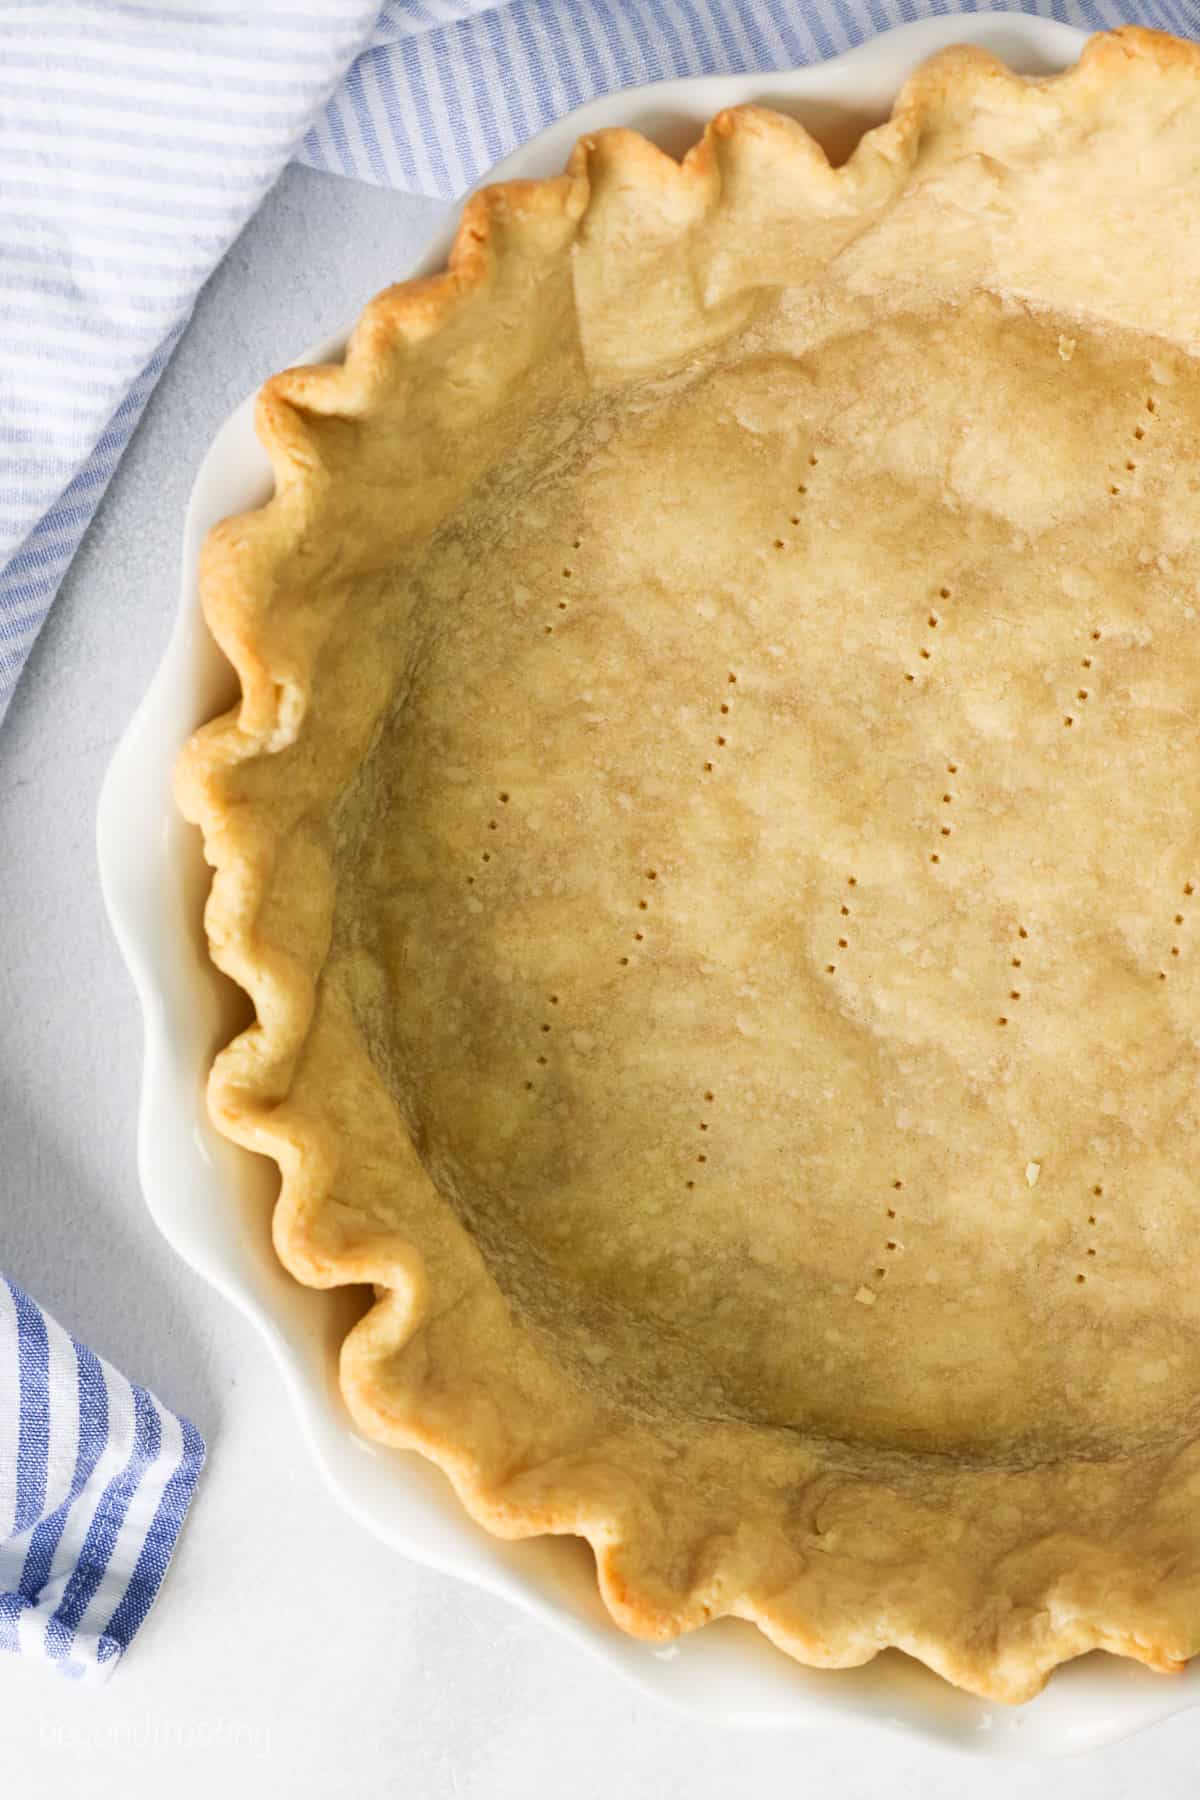 Overhead view of a partially baked pie crust in a pie plate.